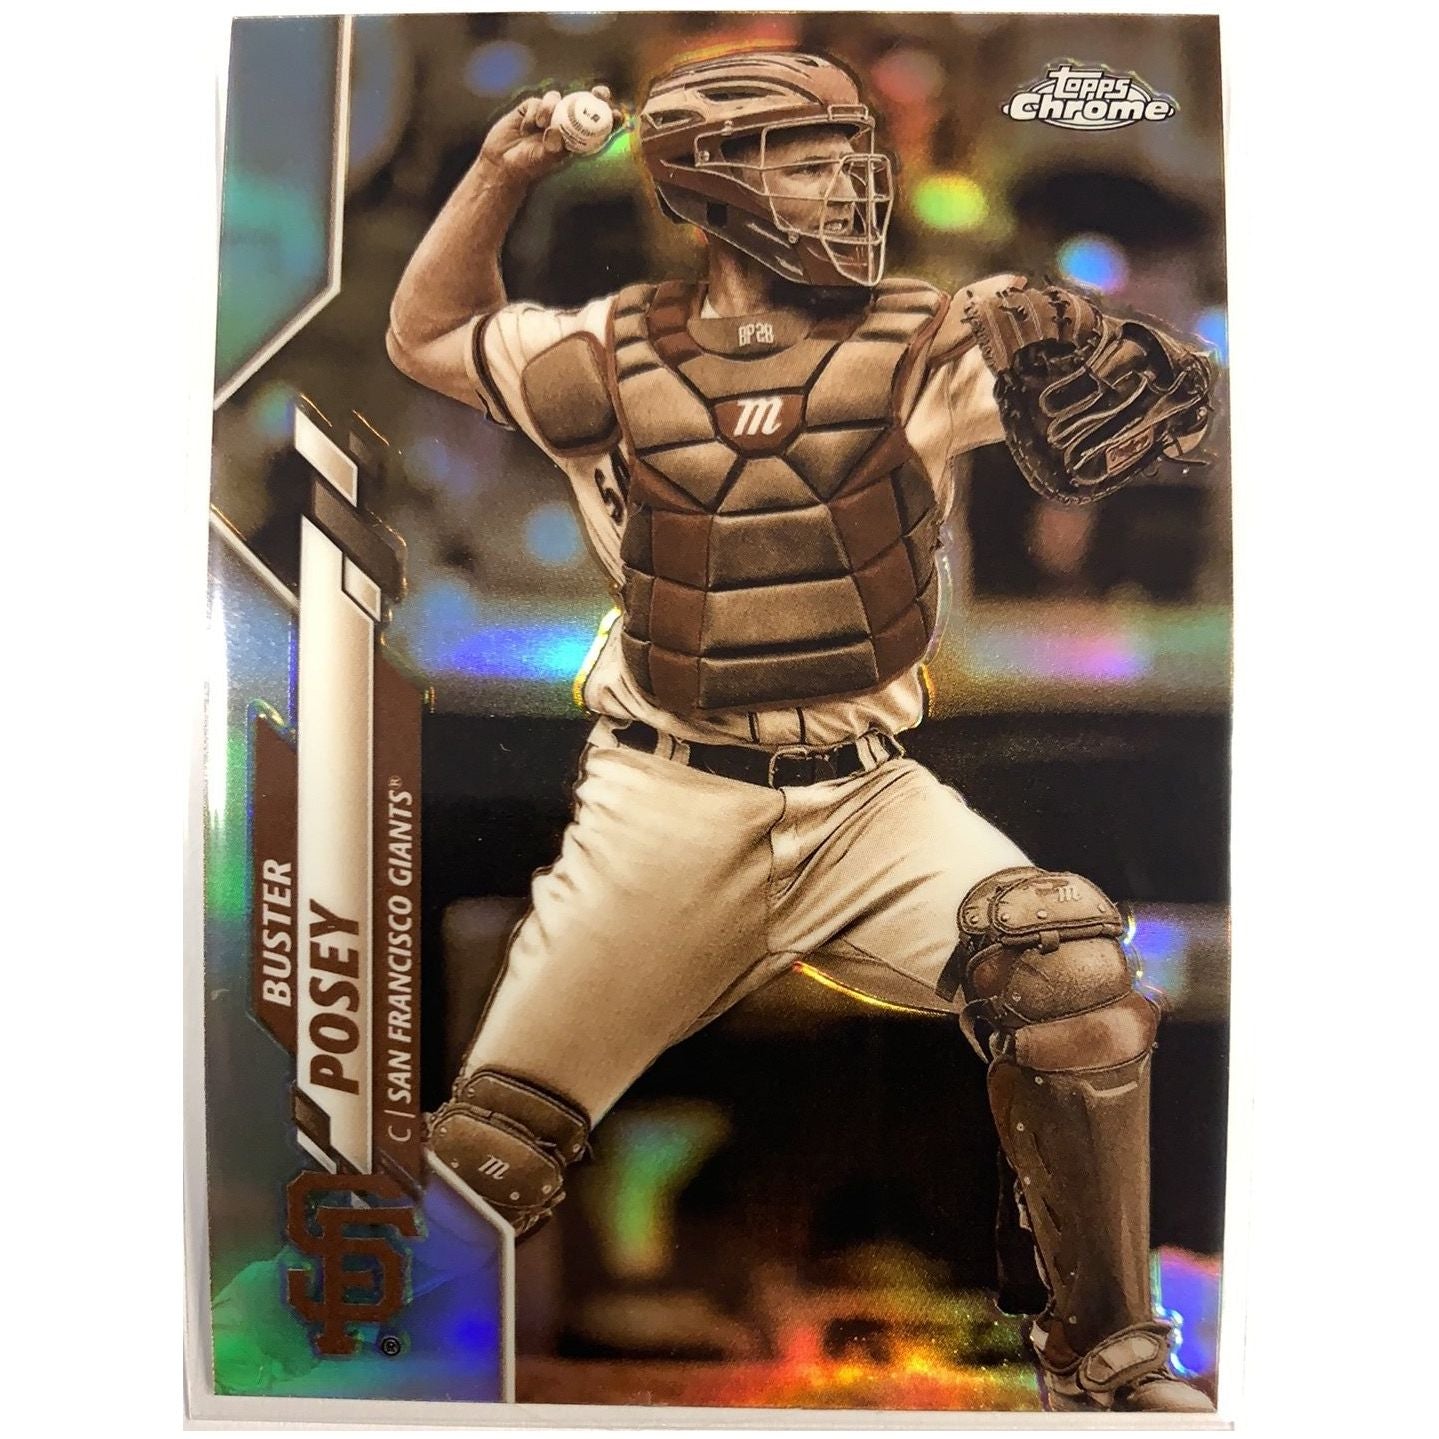  2020 Topps Chrome Buster Posey Sepia Refractor  Local Legends Cards & Collectibles